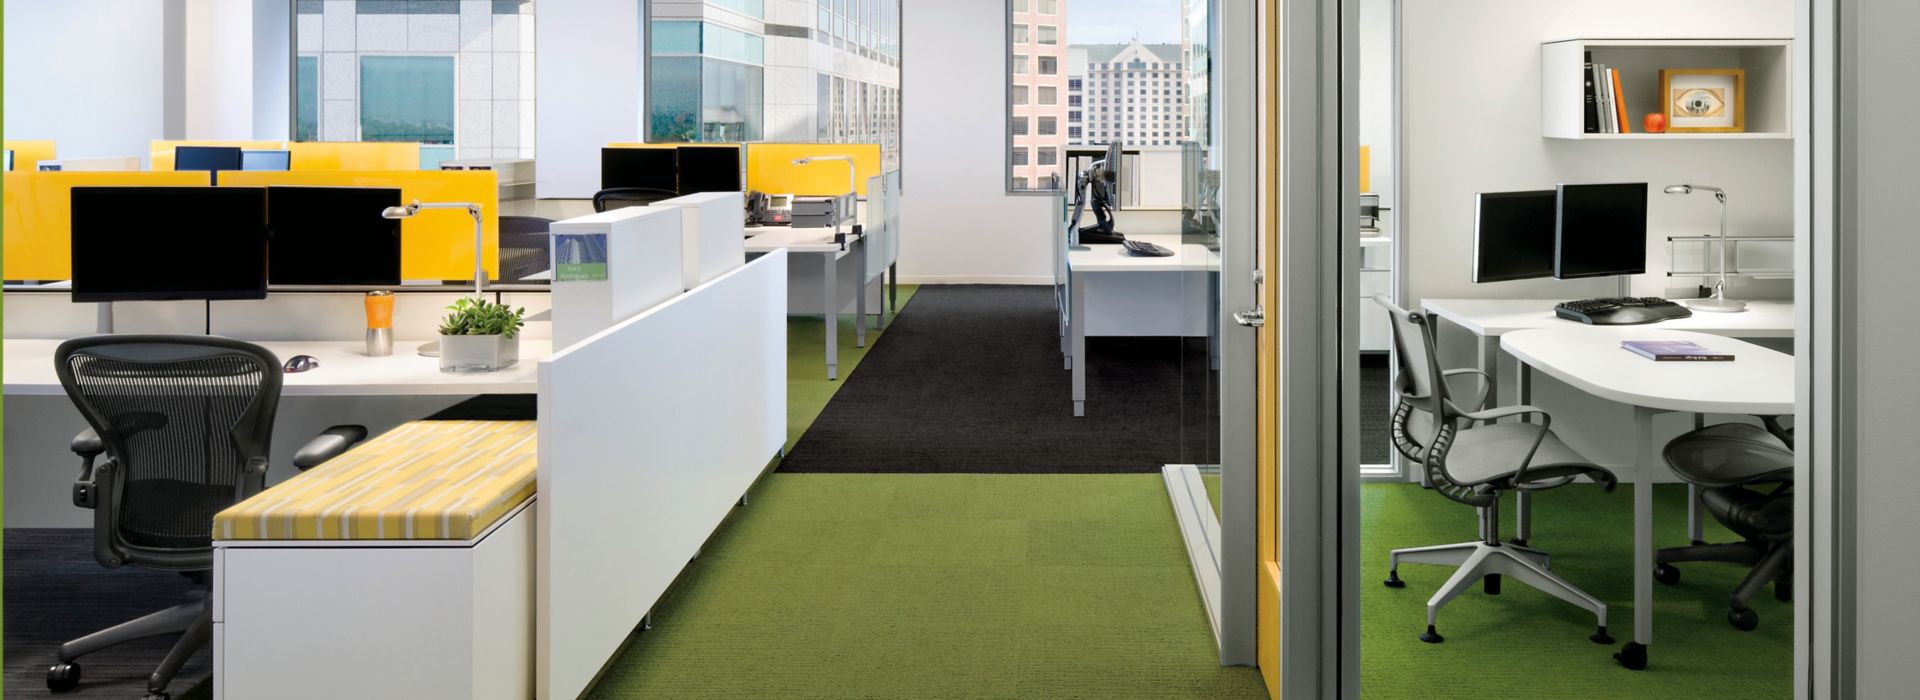 Interface Monochrome and Striation carpet tile in walkway of office with multiple open offices and a private office Bildnummer 1